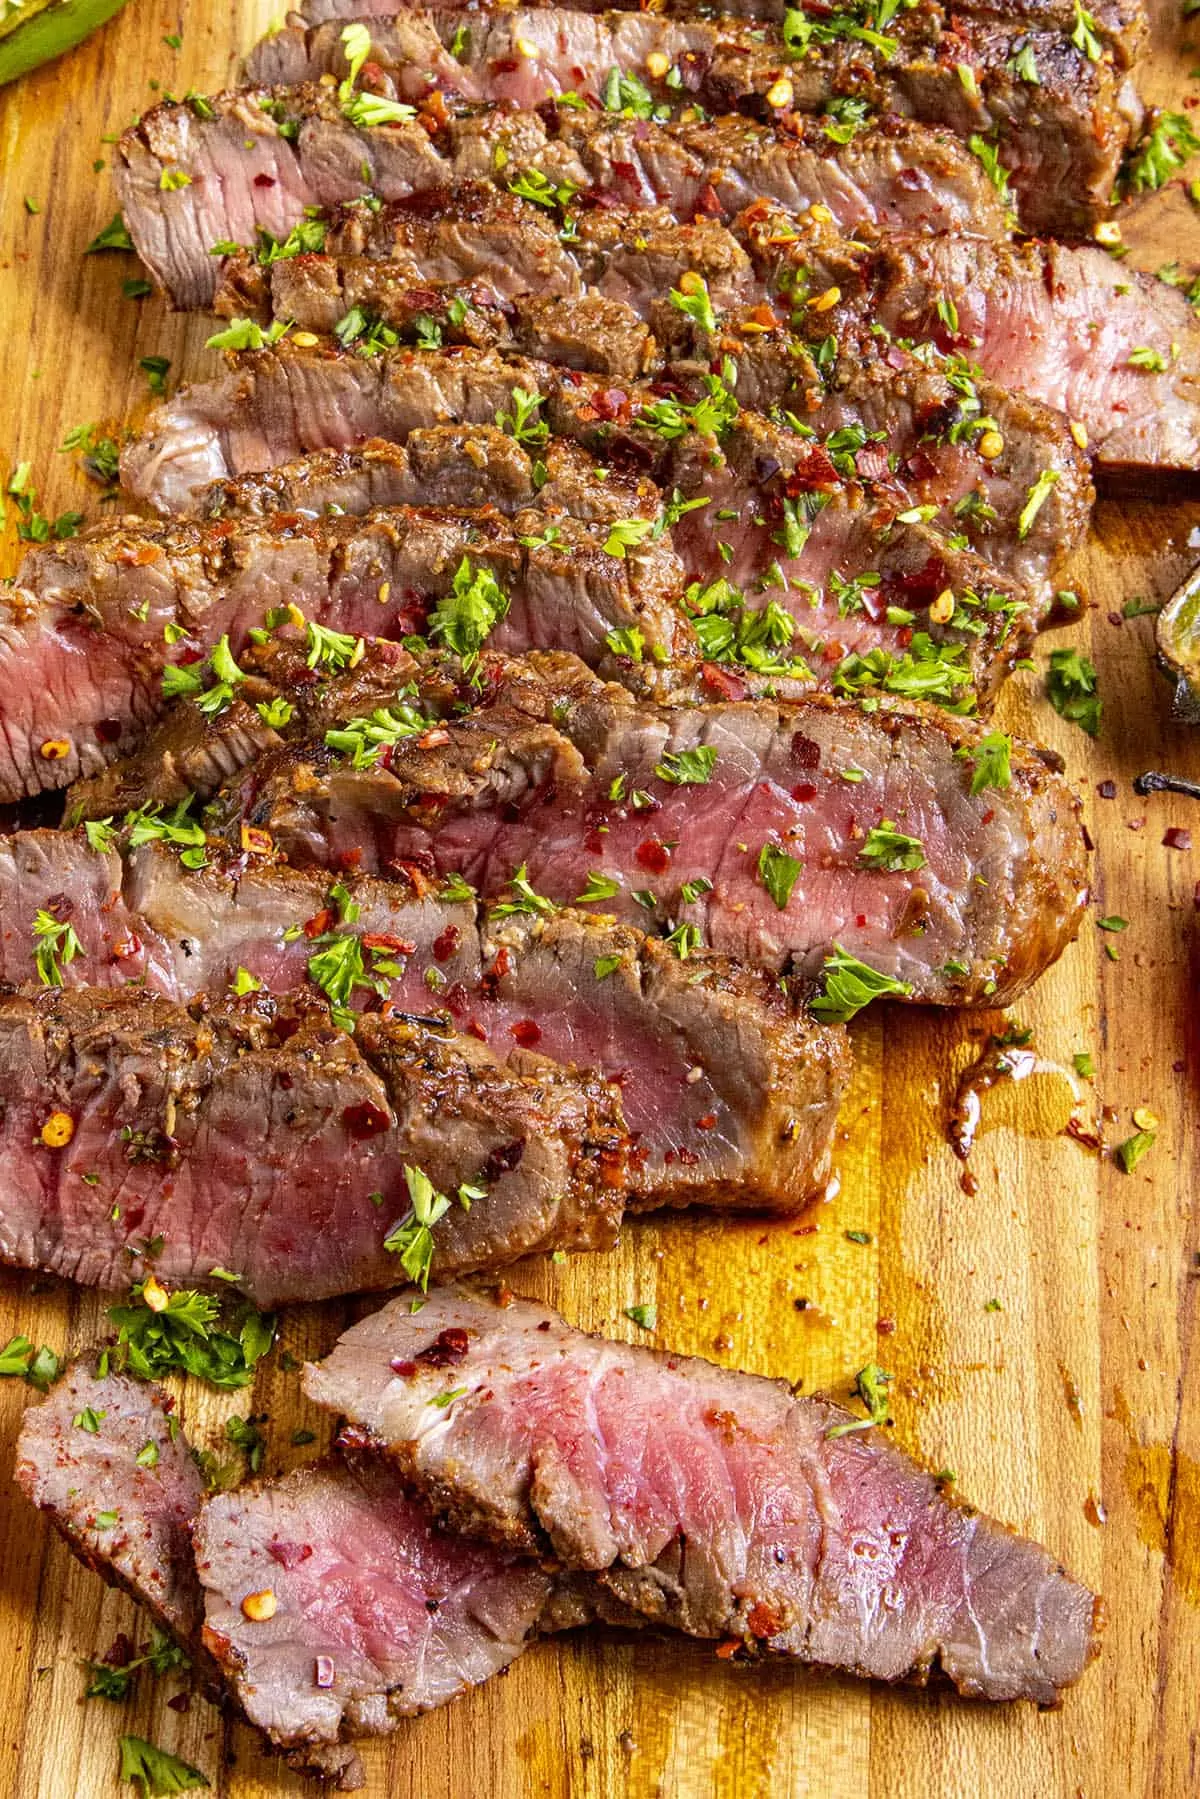 Sliced London broil on a cutting board